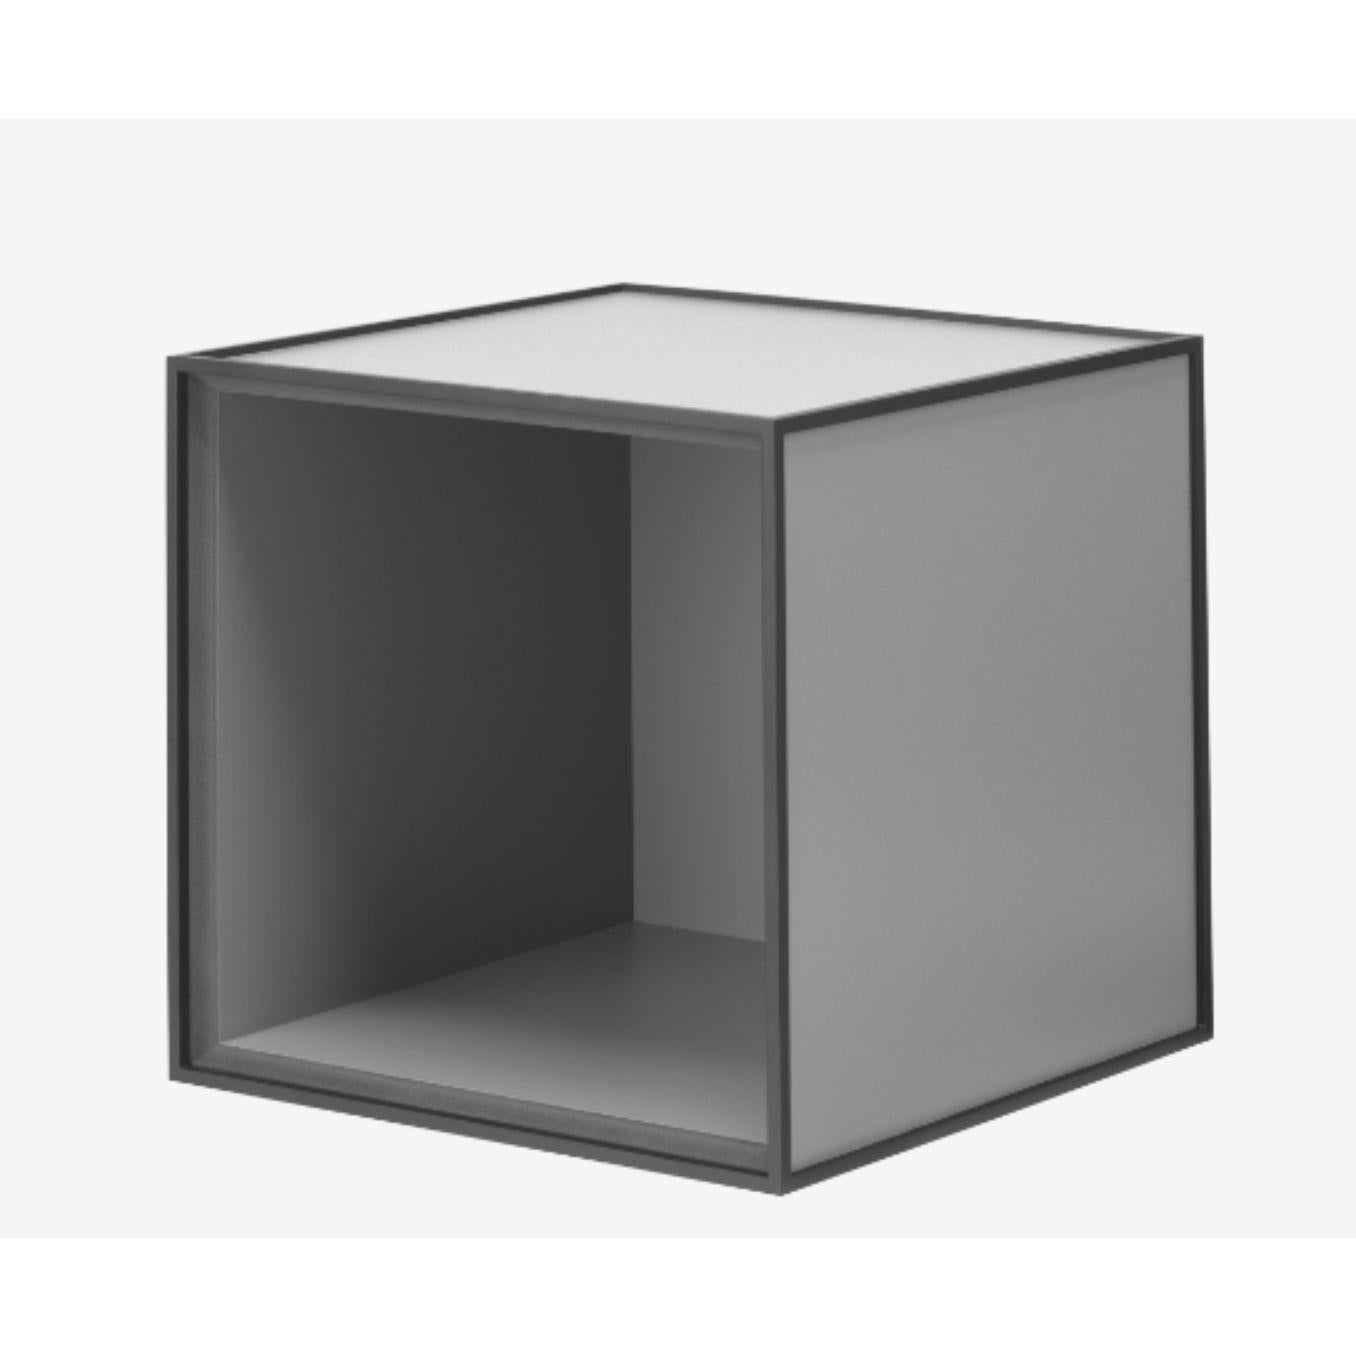 28 dark grey frame box by Lassen
Dimensions: W 35 x D 35 x H 35 cm 
Materials: Finér, Melamin, Melamin, Melamine, metal, Veneer, oak
Also available in different colours and dimensions.

By Lassen is a Danish design brand focused on iconic